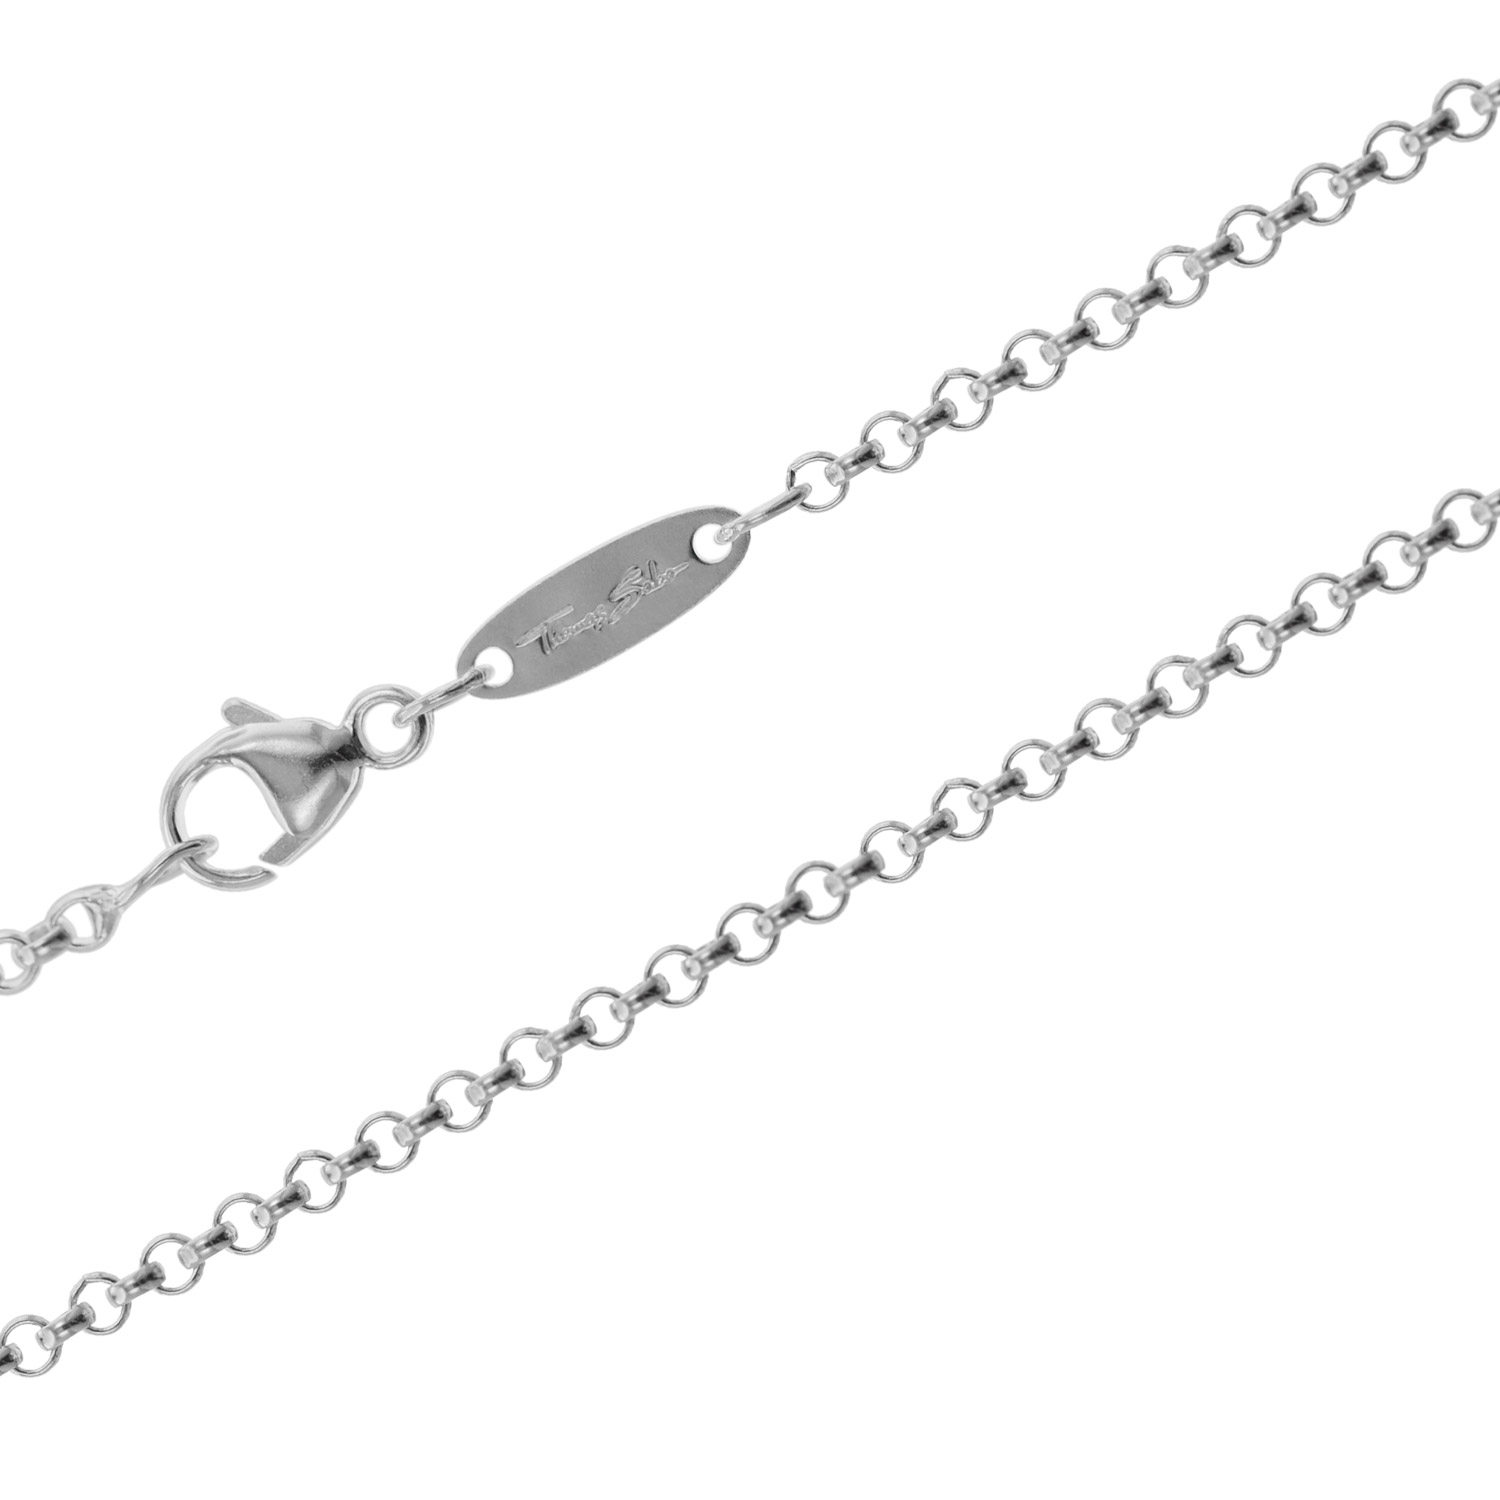 Thomas Sabo Ladies Necklace for uhrcenter Charms X0001-001-12 •